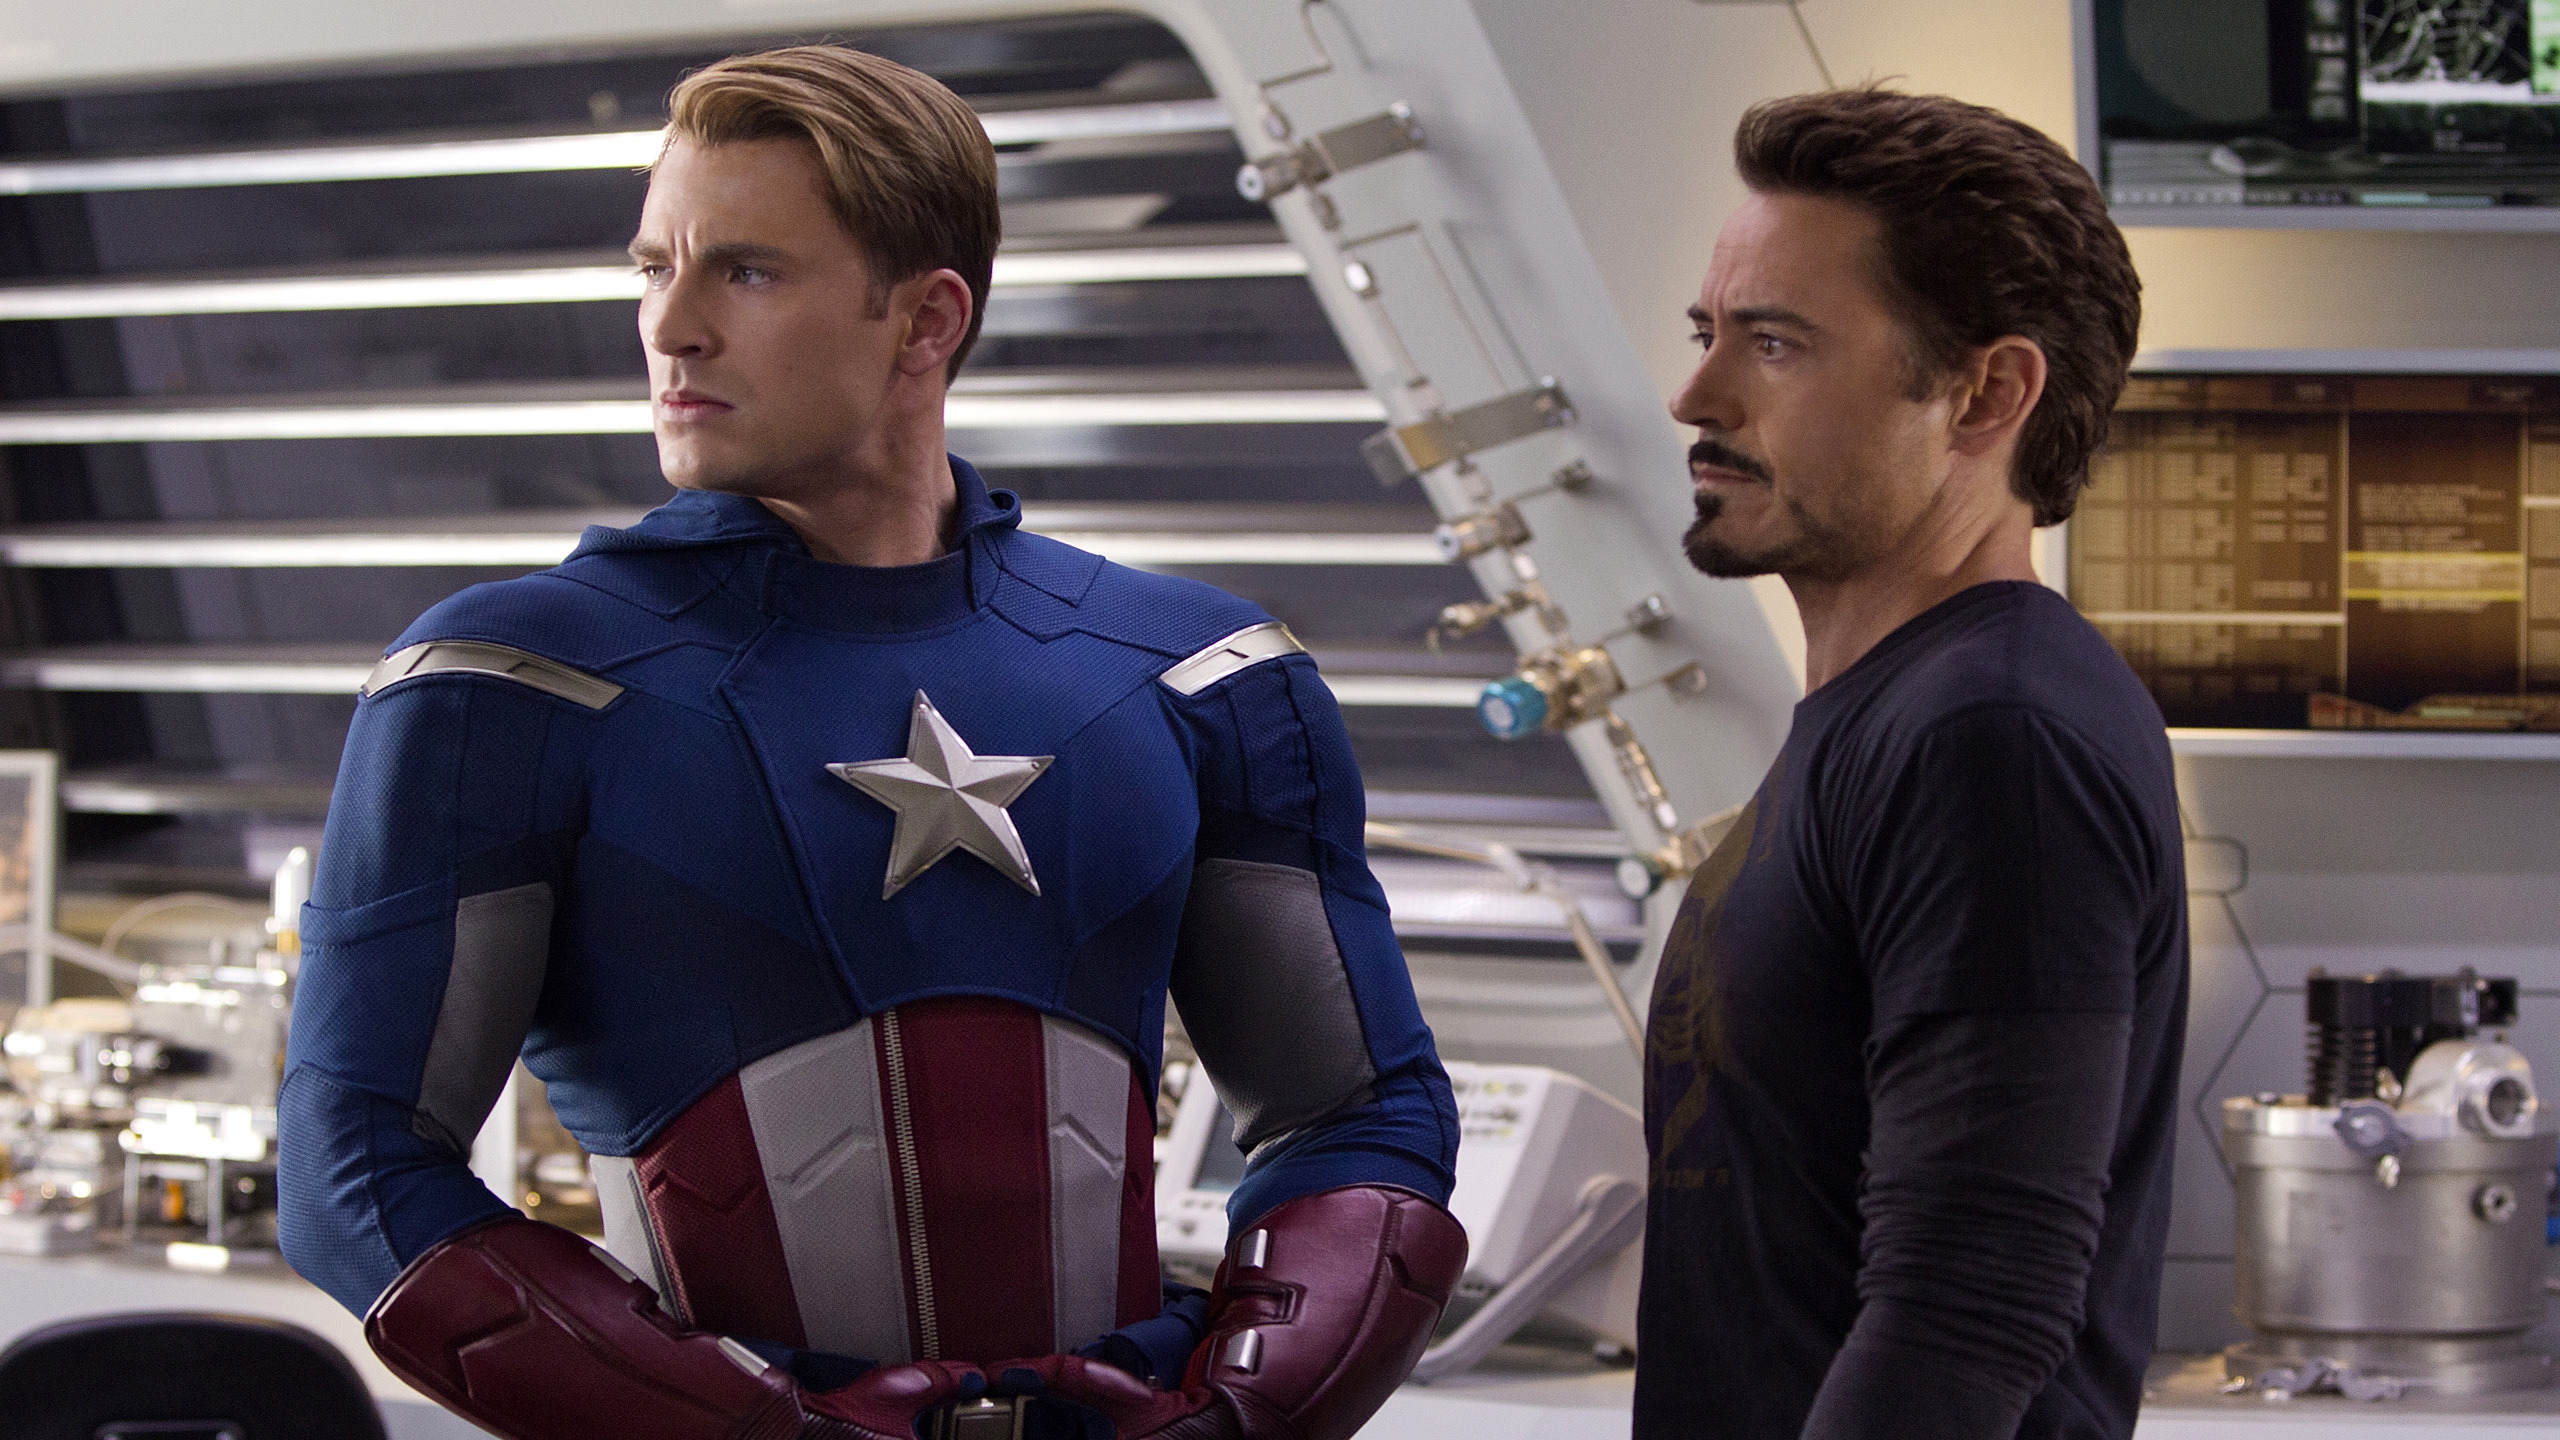 Captain America and Iron Man for 2560x1440 HDTV resolution